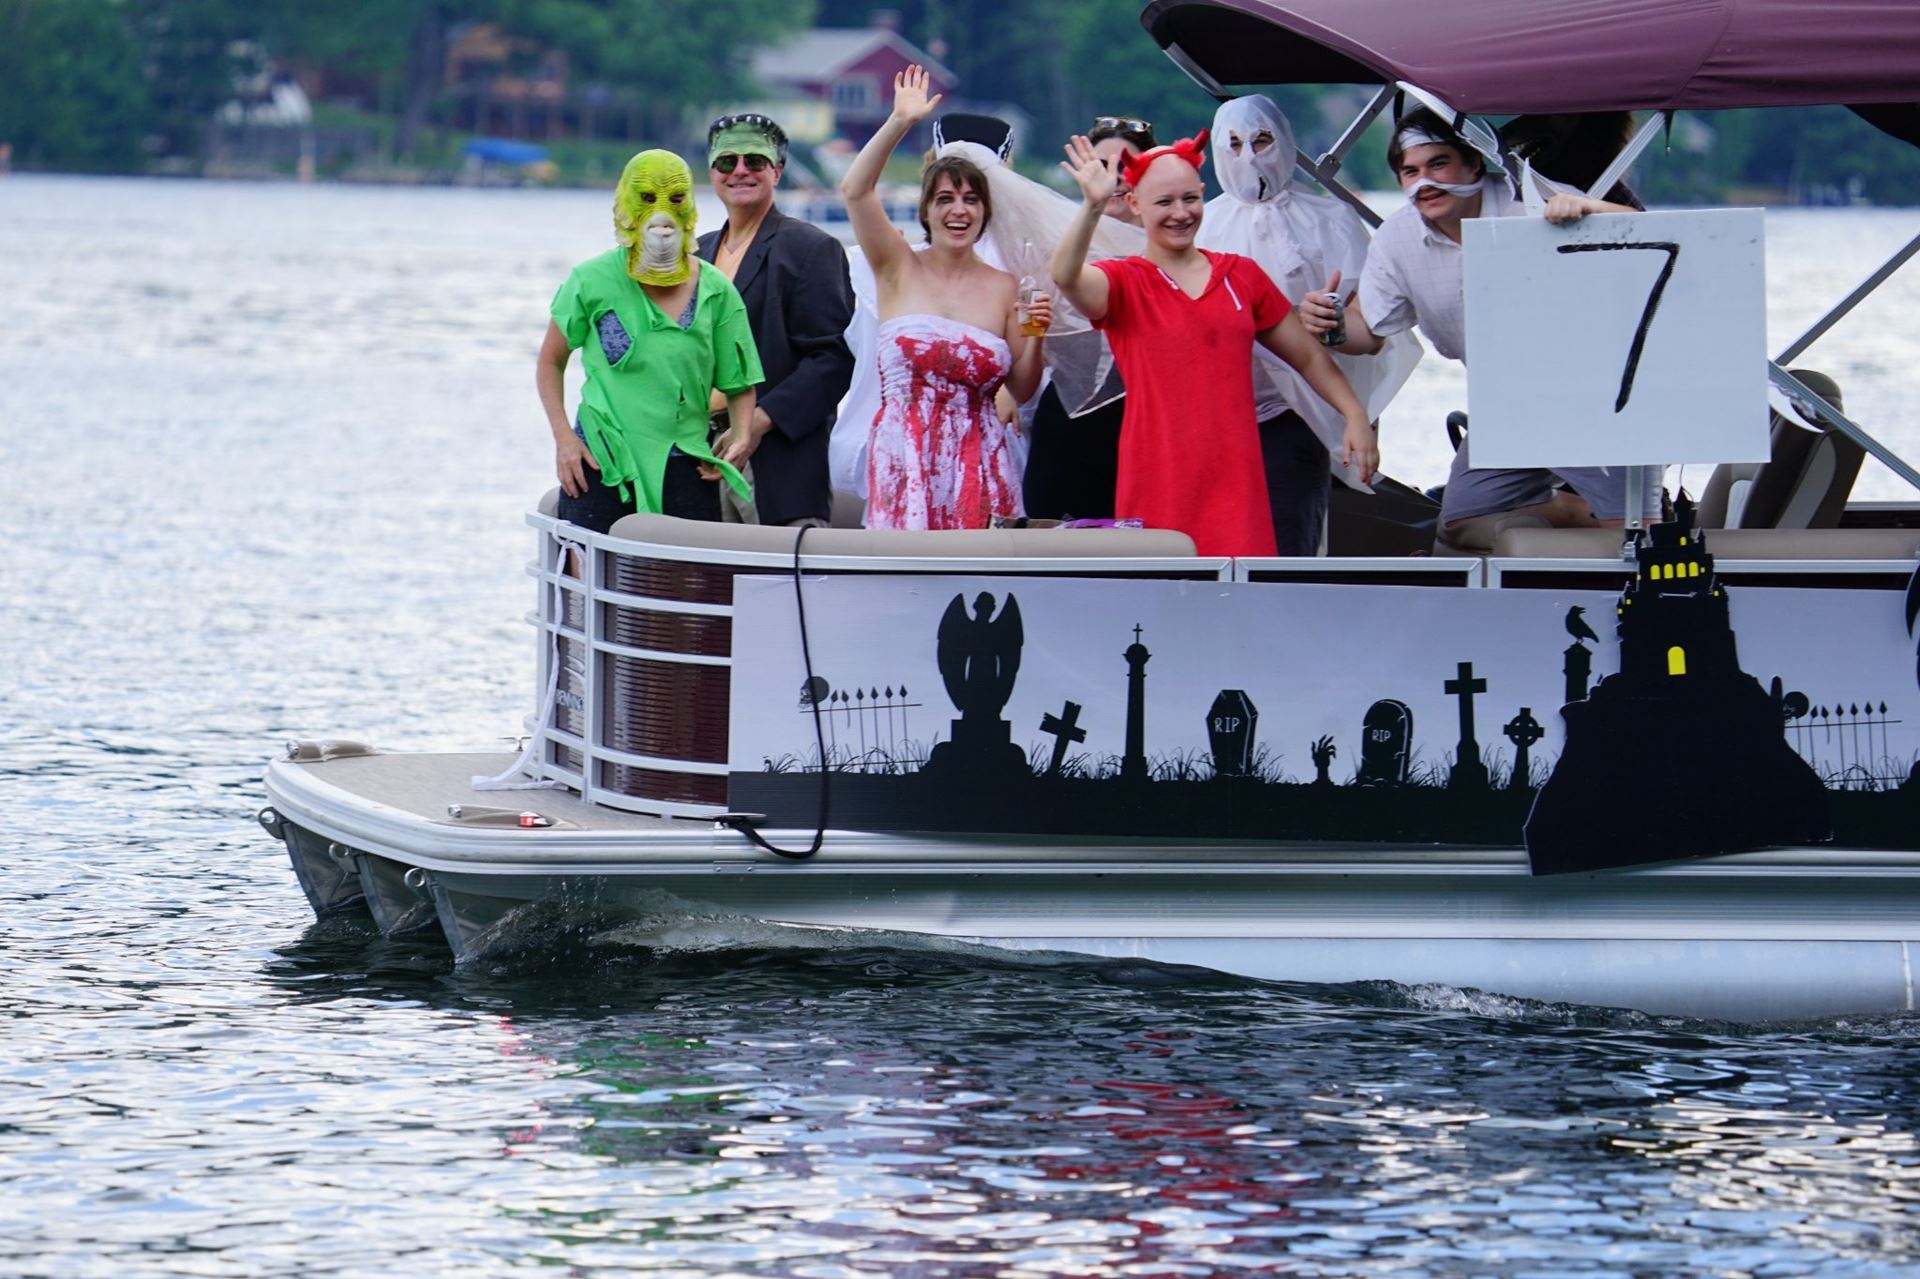 Funniest: 1st Place: Boat #7 - Monster Mash - The Ramirez Family 